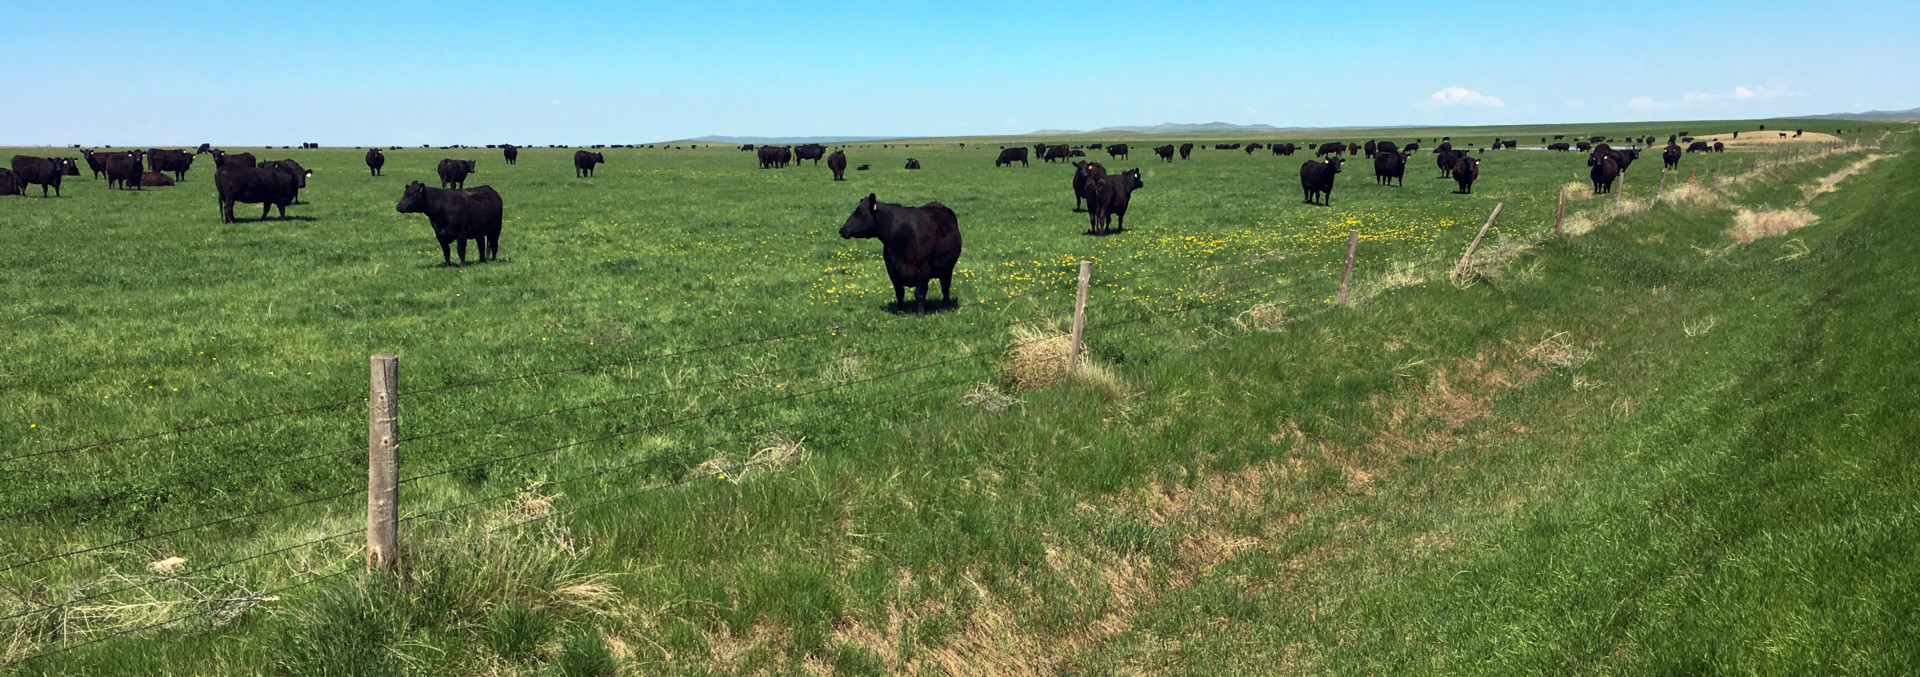 south dakota cattle ranch for sale northern plains grassland and cattle ranch